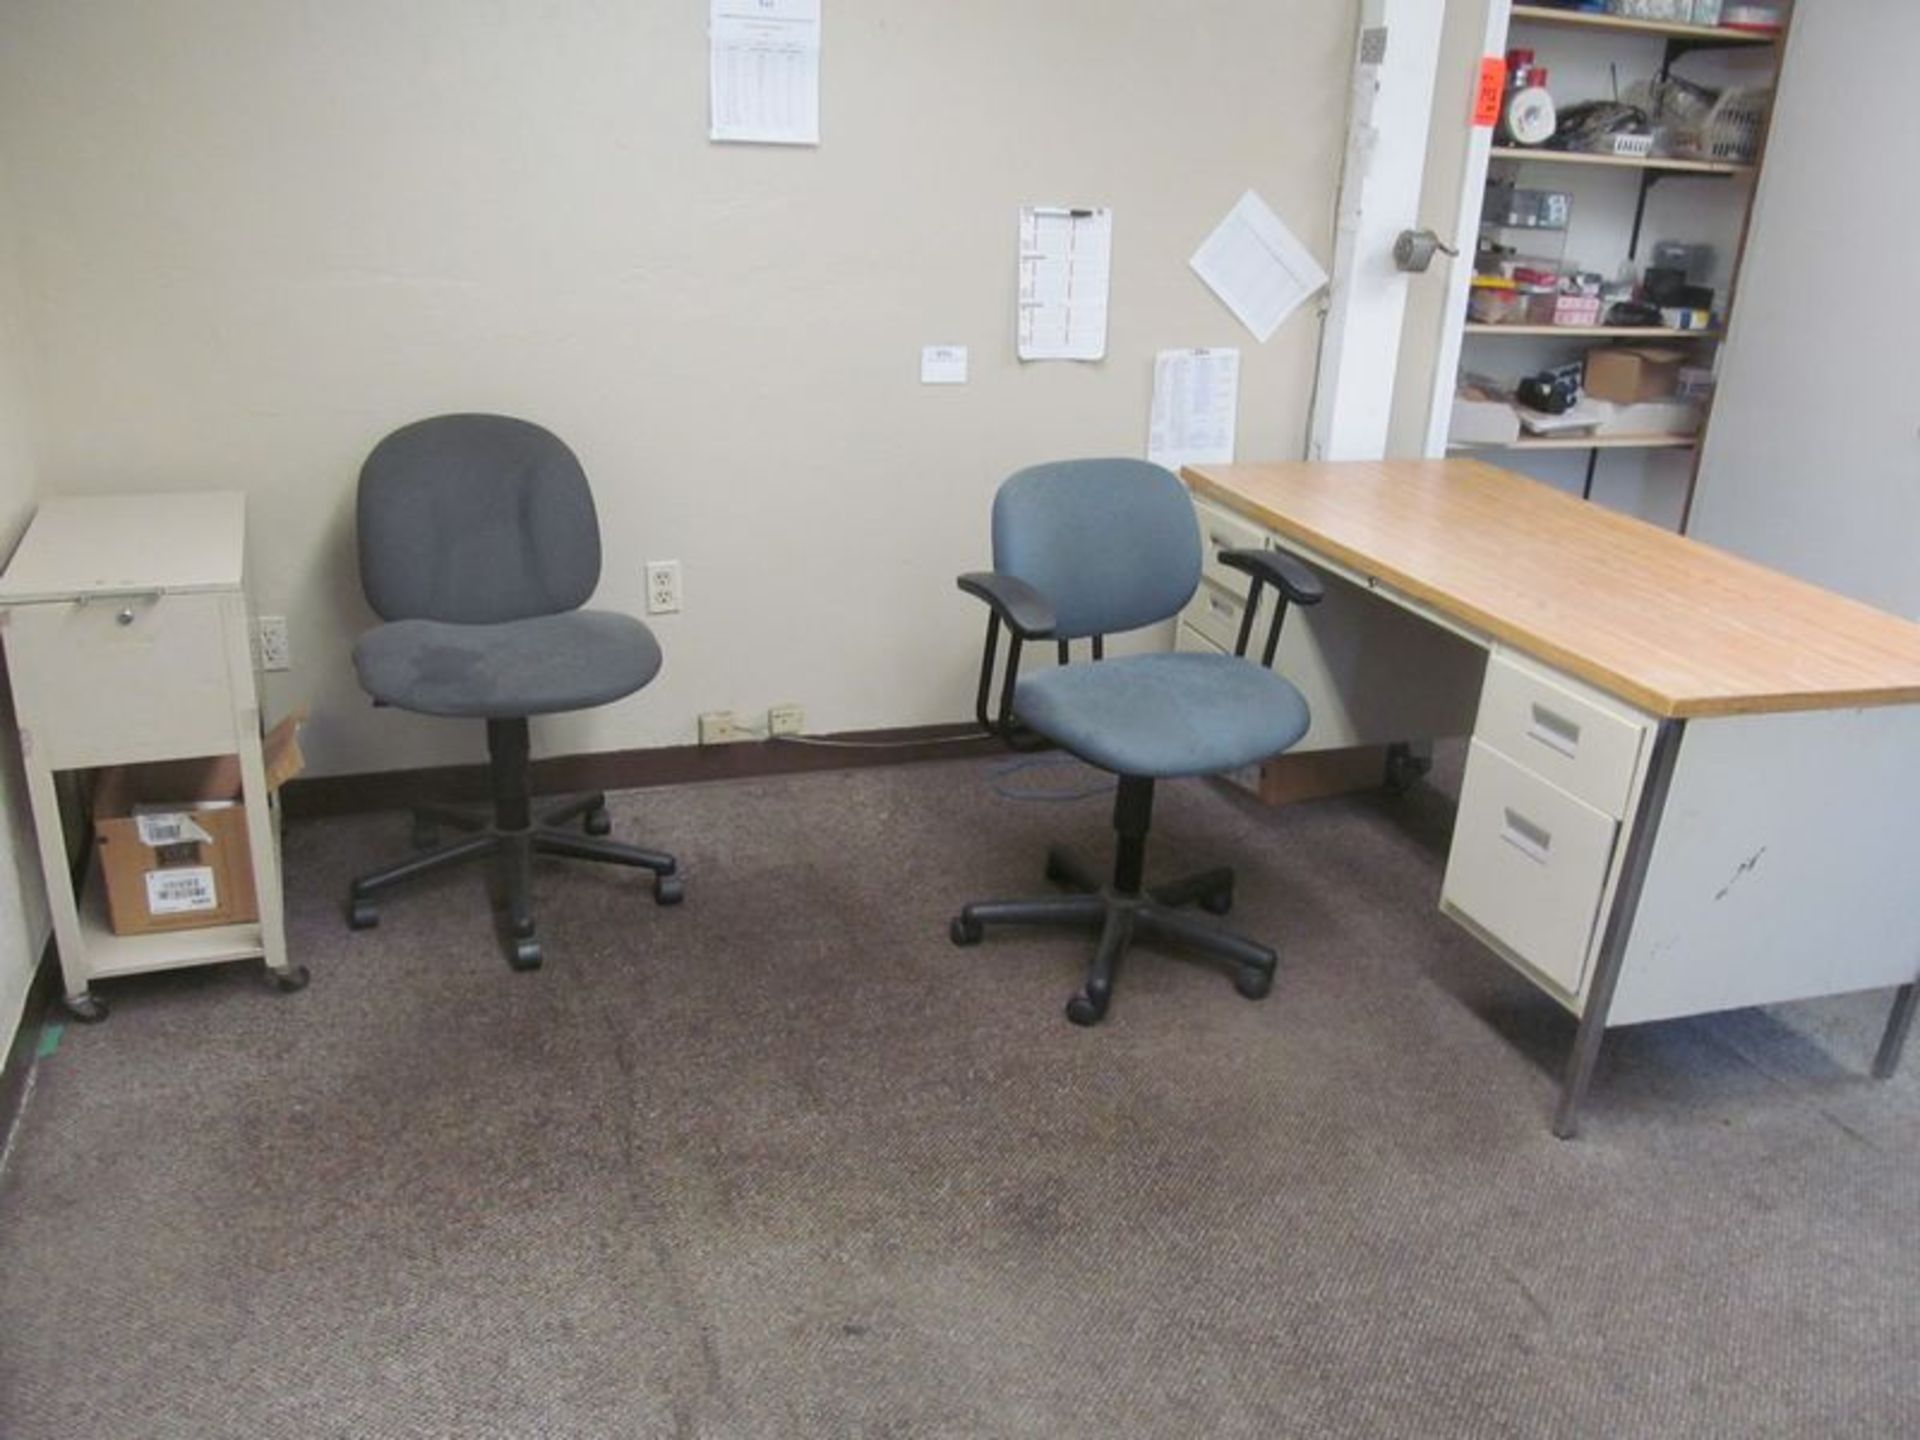 Lot of assorted furniture, including: (2) assorted desks, (4) chairs, (1) tub file, (1) 5 drawer